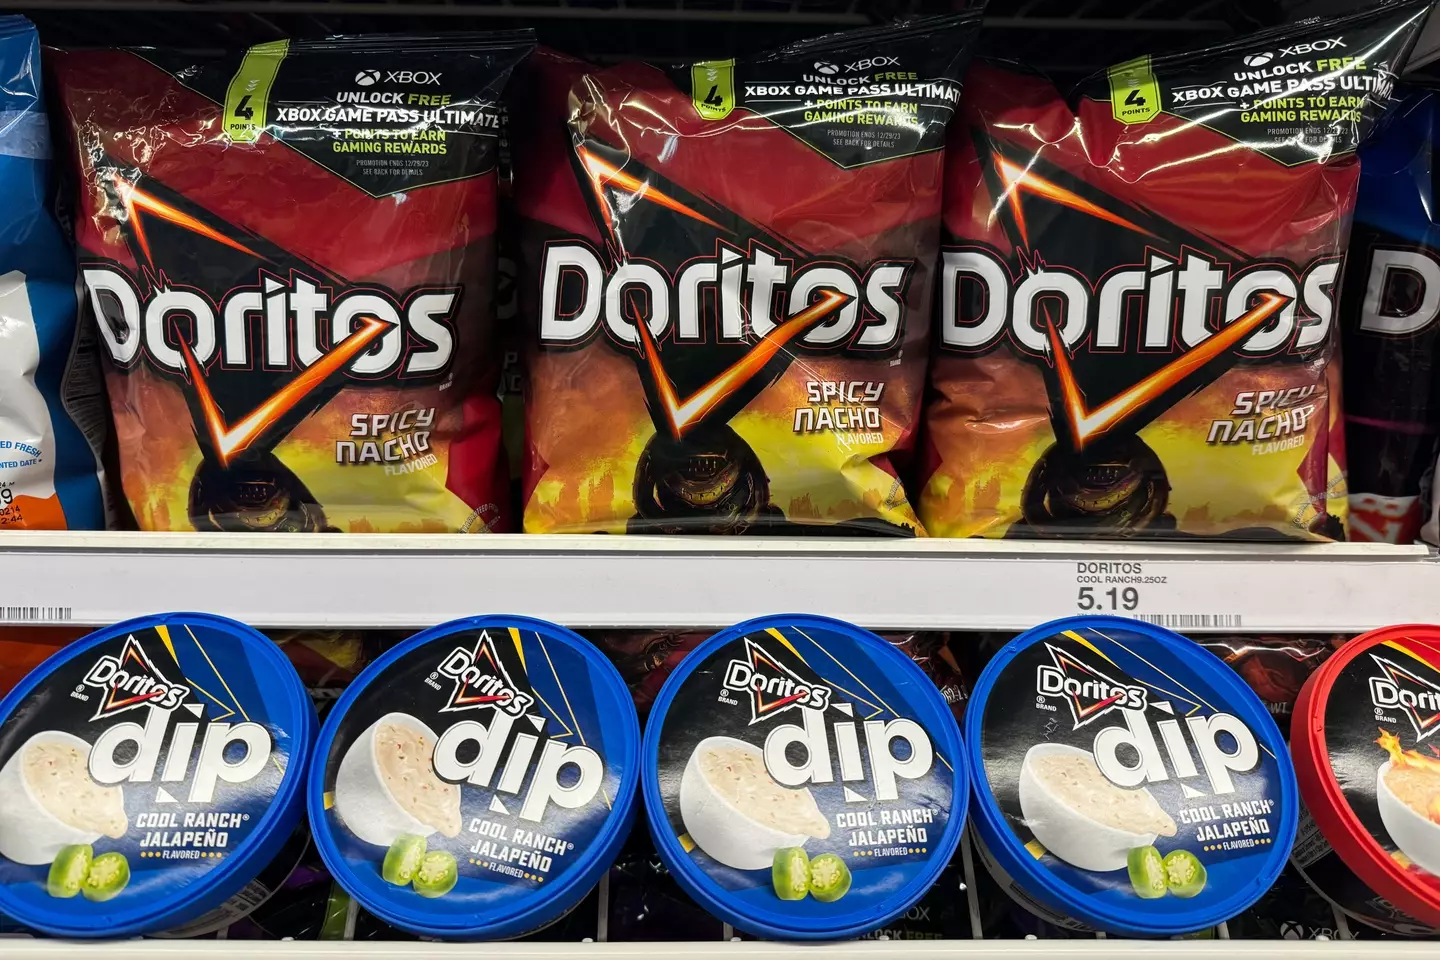 Don't even get me started on my love of crisps and dips.